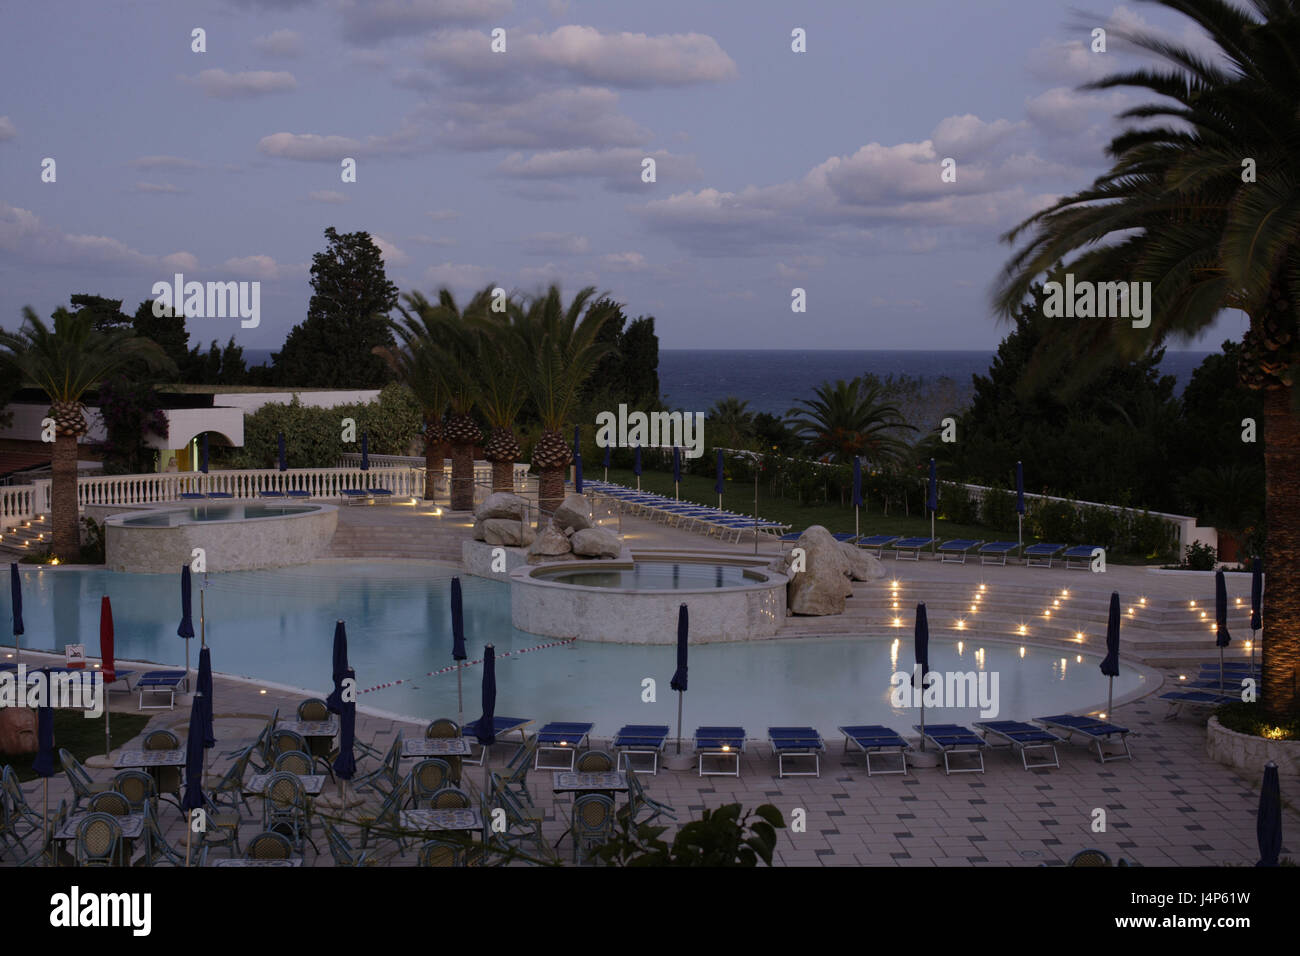 Italy, Calabria, Tropea, hotel Rocca Nettuno, pool attachment, dusk, Süditalien, hotel facility, pool, swimming pool, palms, deck chairs, vacation, beach holiday, summer vacation, travel destination, tourism, evening tuning, Stock Photo